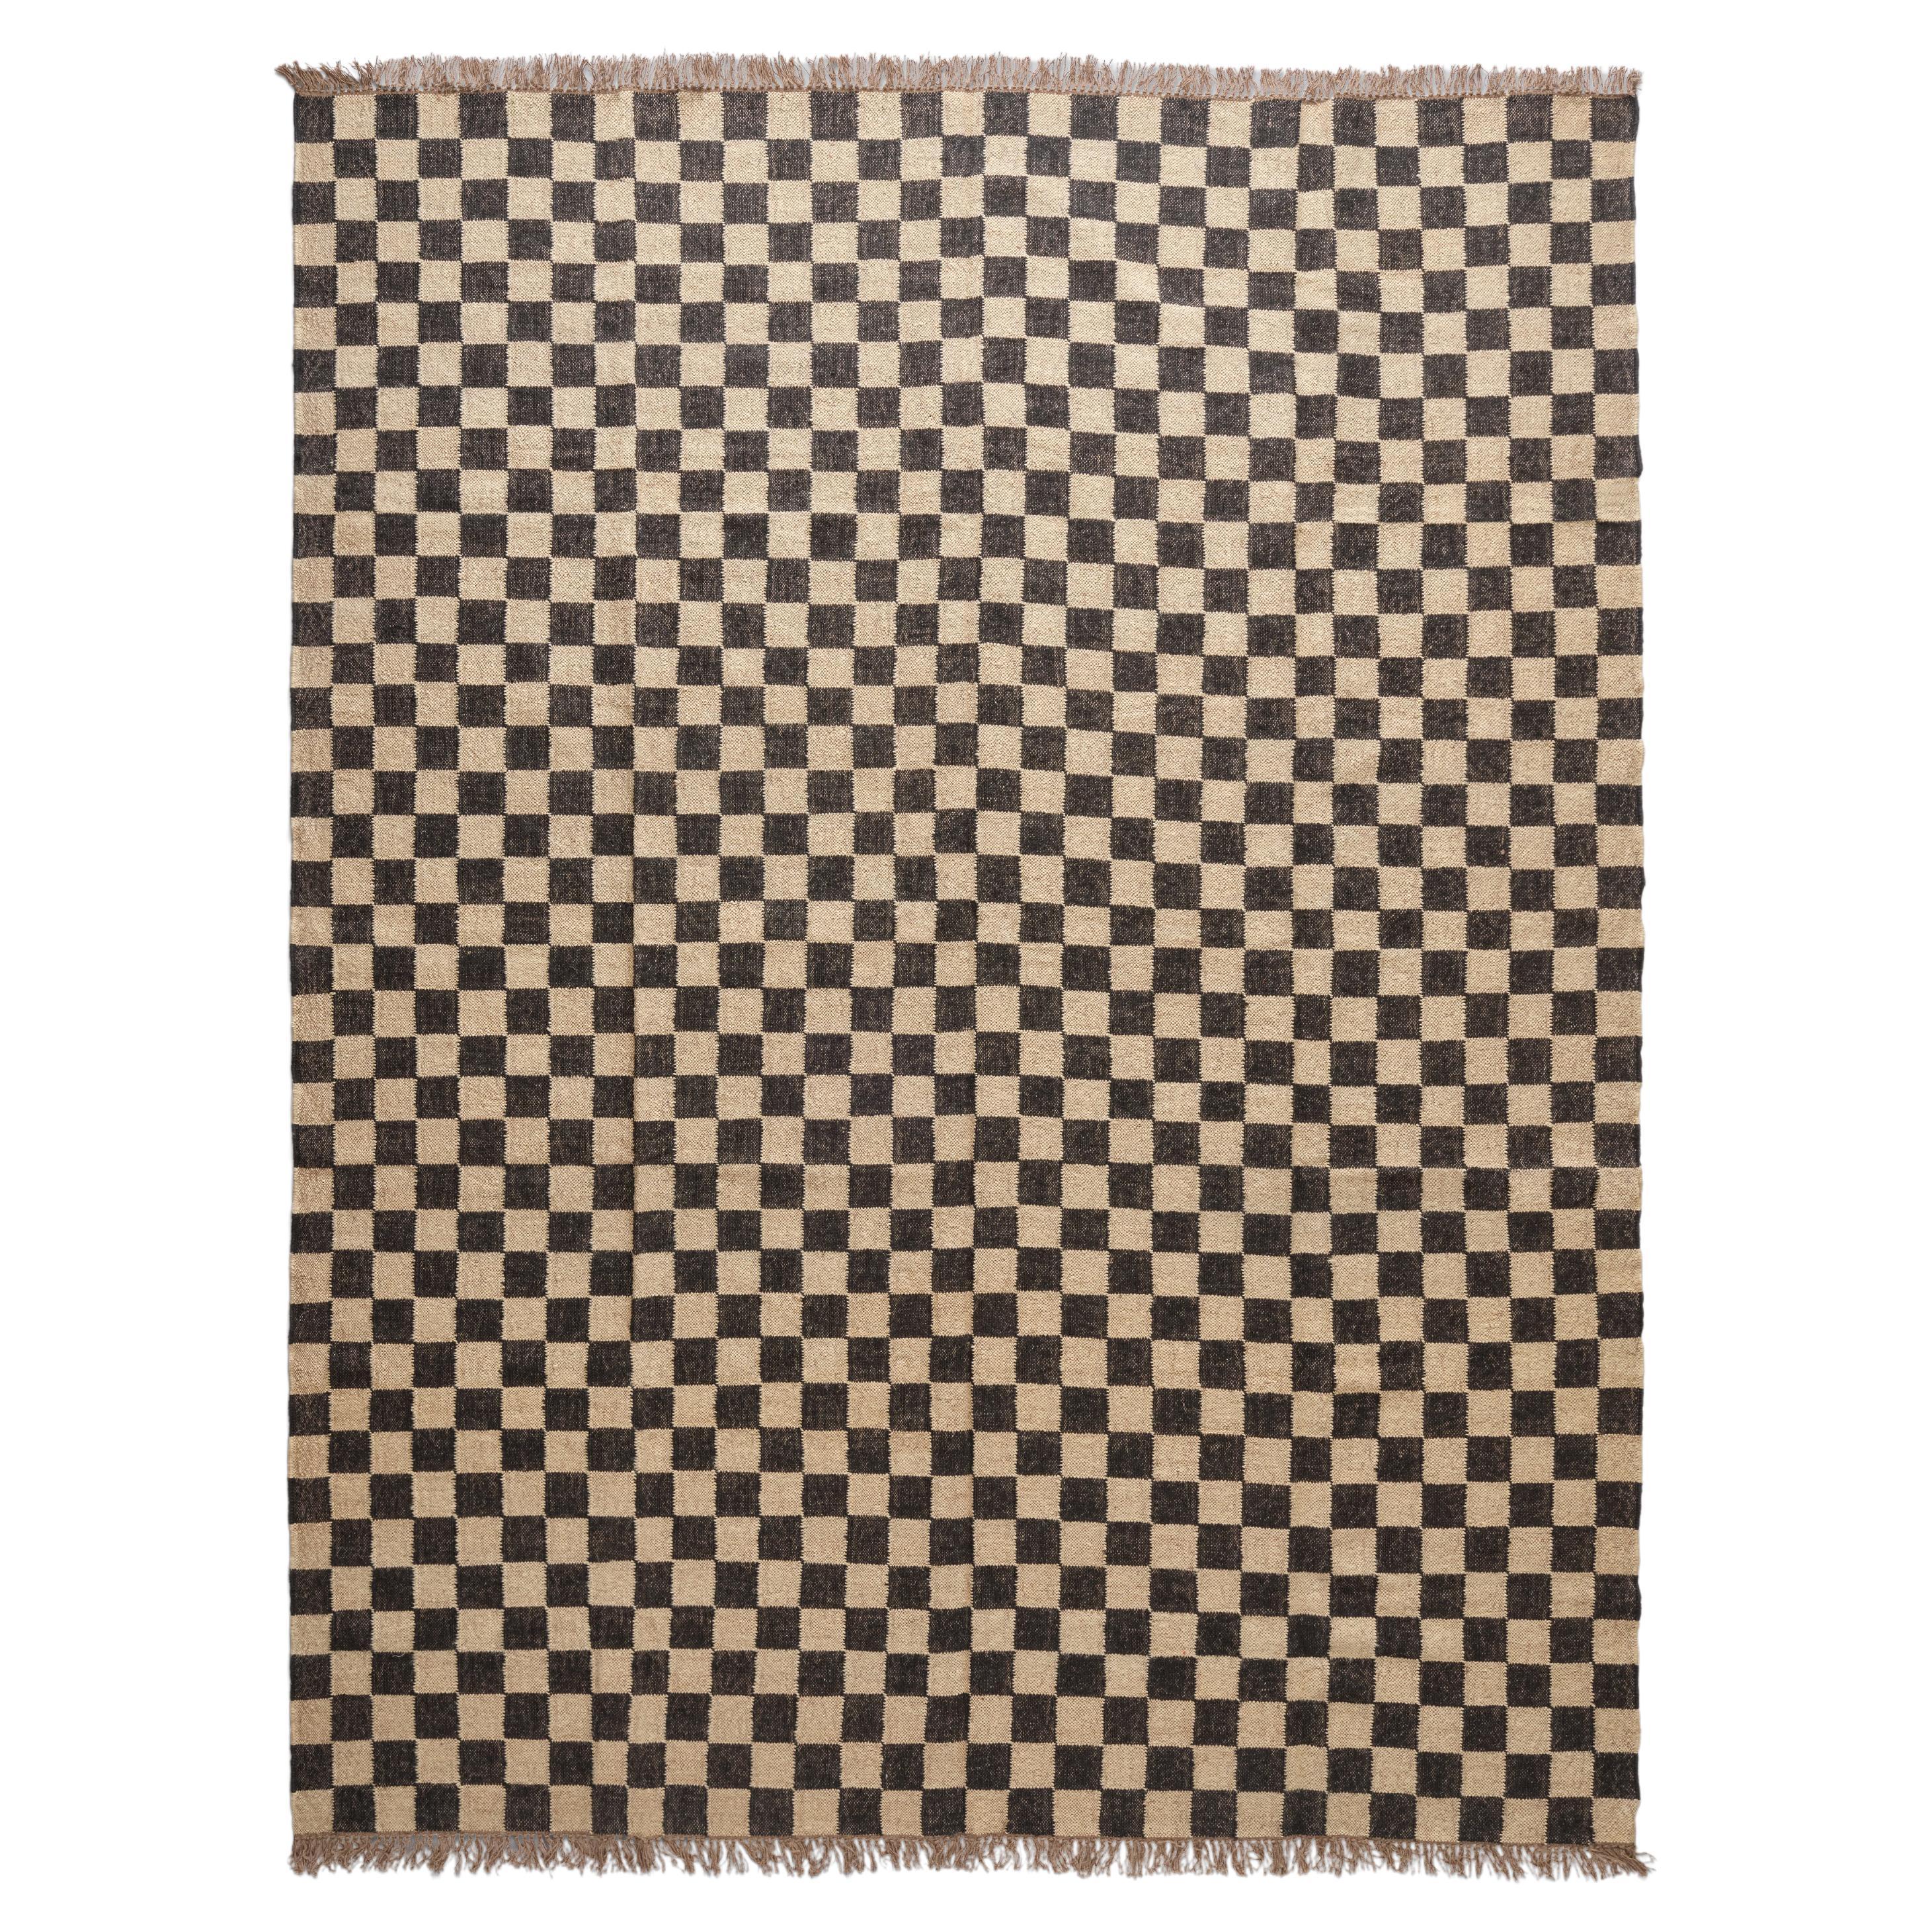 The Forsyth Checkerboard Rug - Off Black, 9x12 For Sale